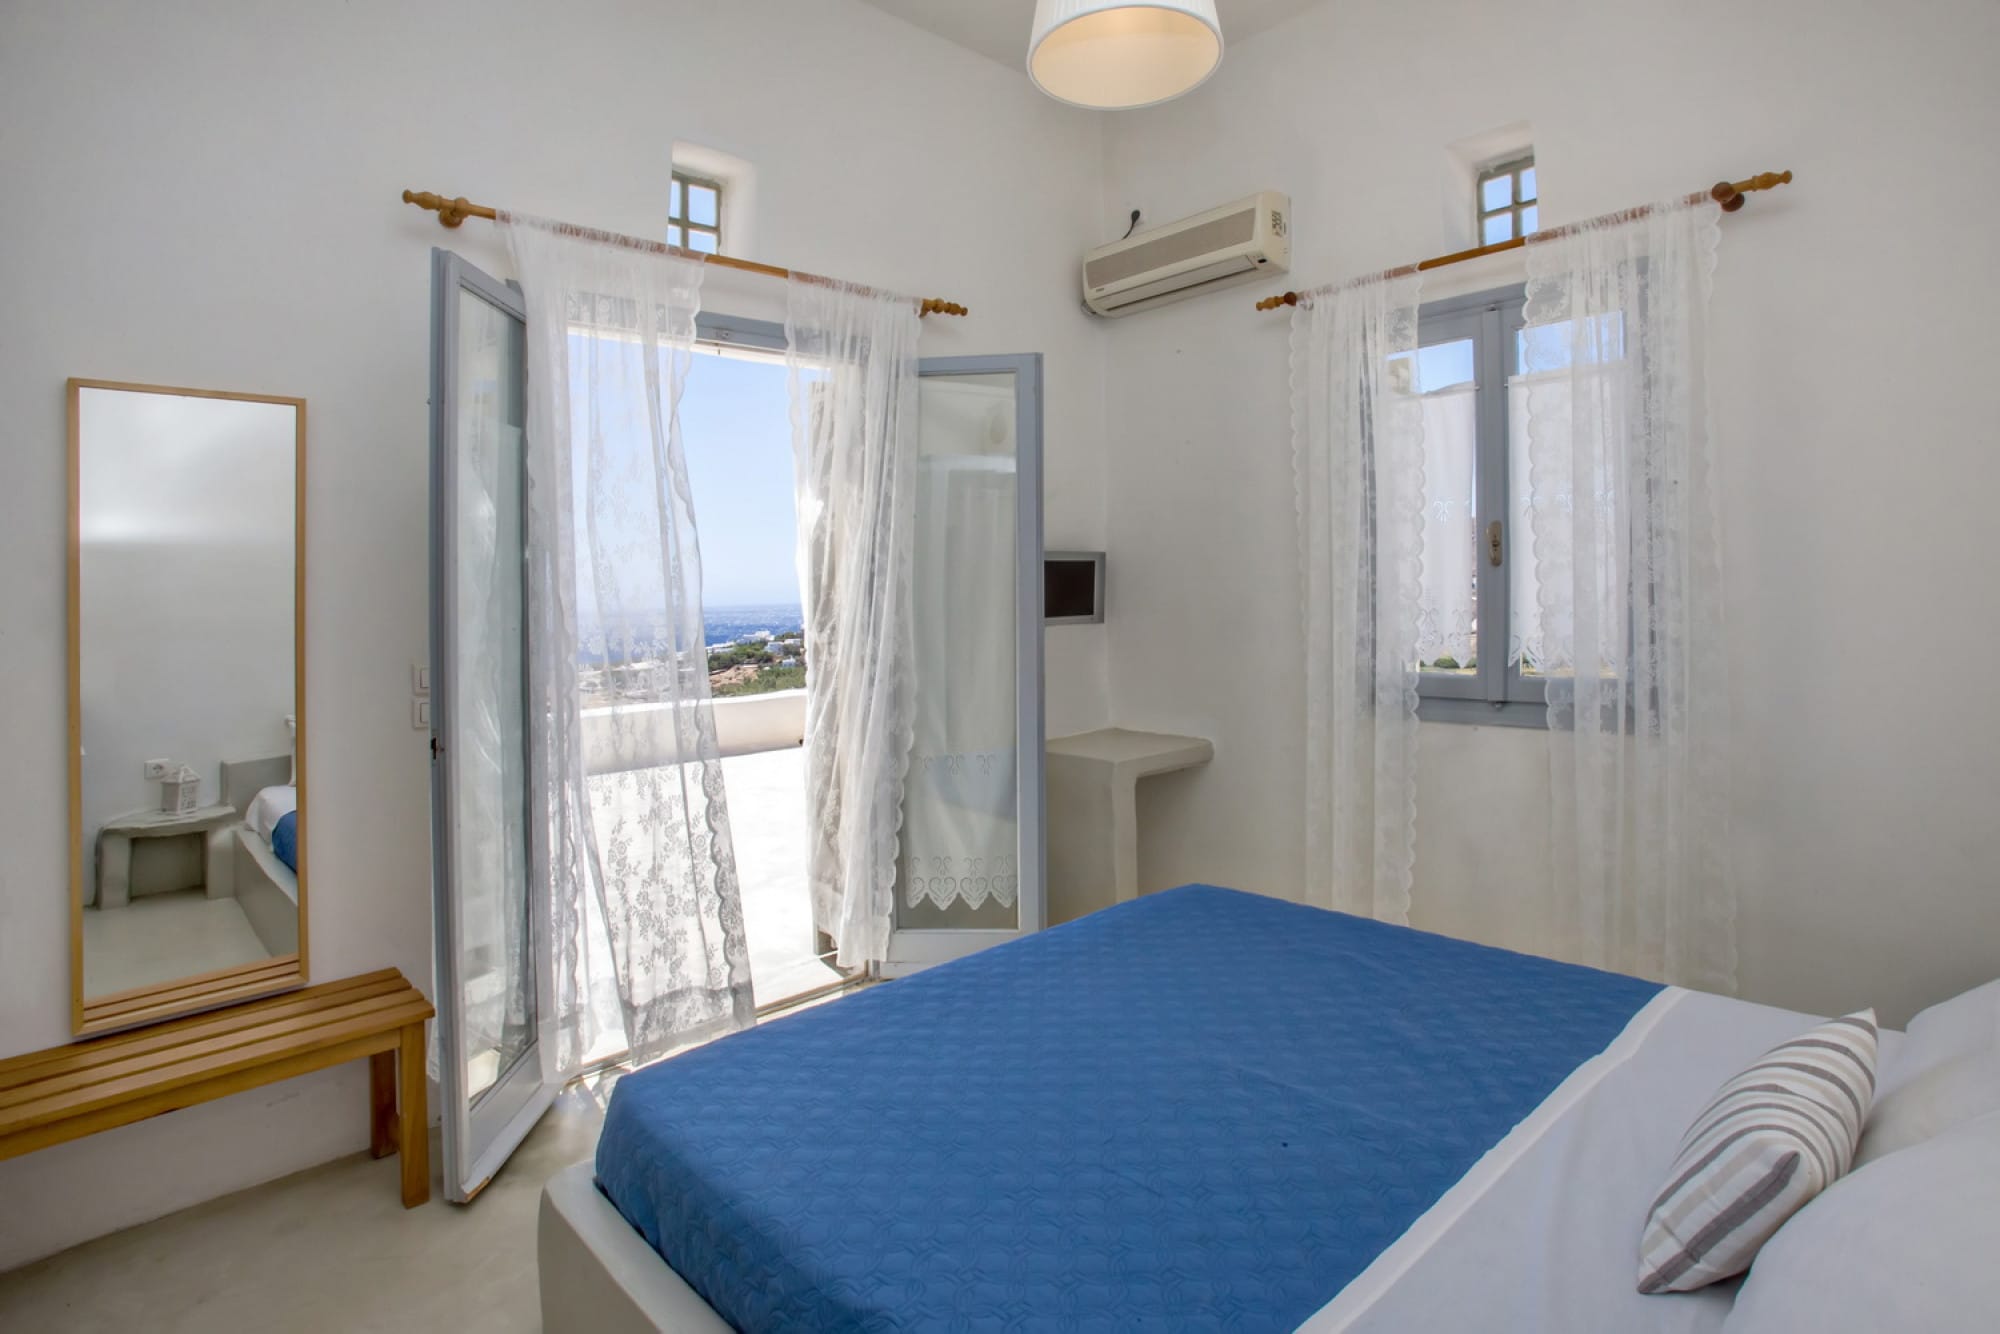 Property Image 1 - Aster house Agios Sostis